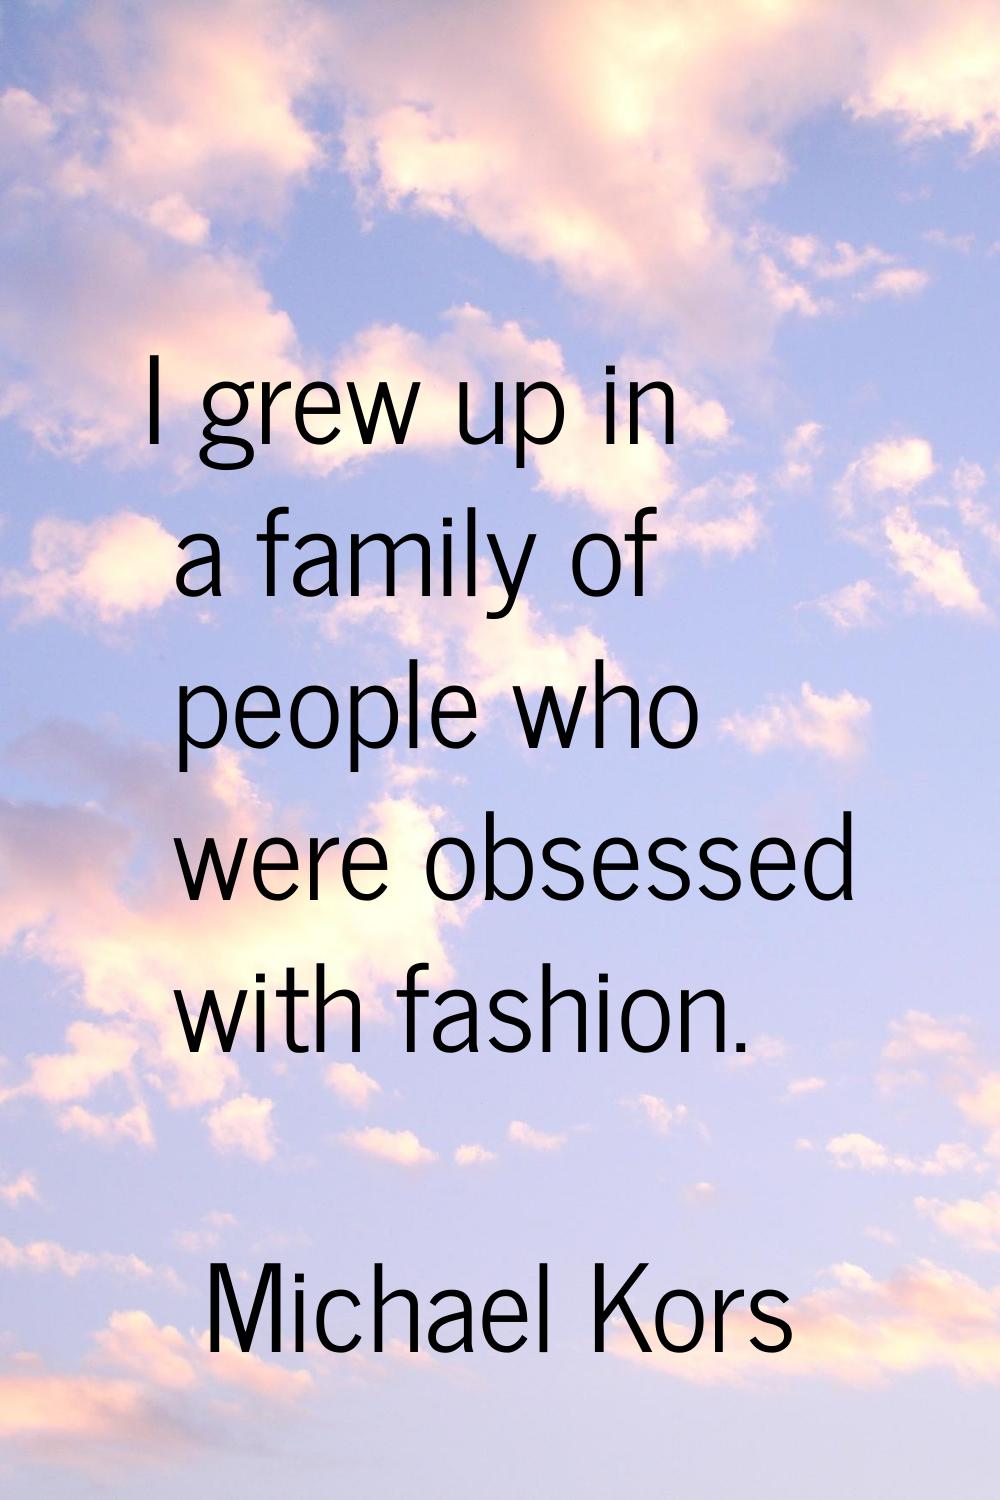 I grew up in a family of people who were obsessed with fashion.